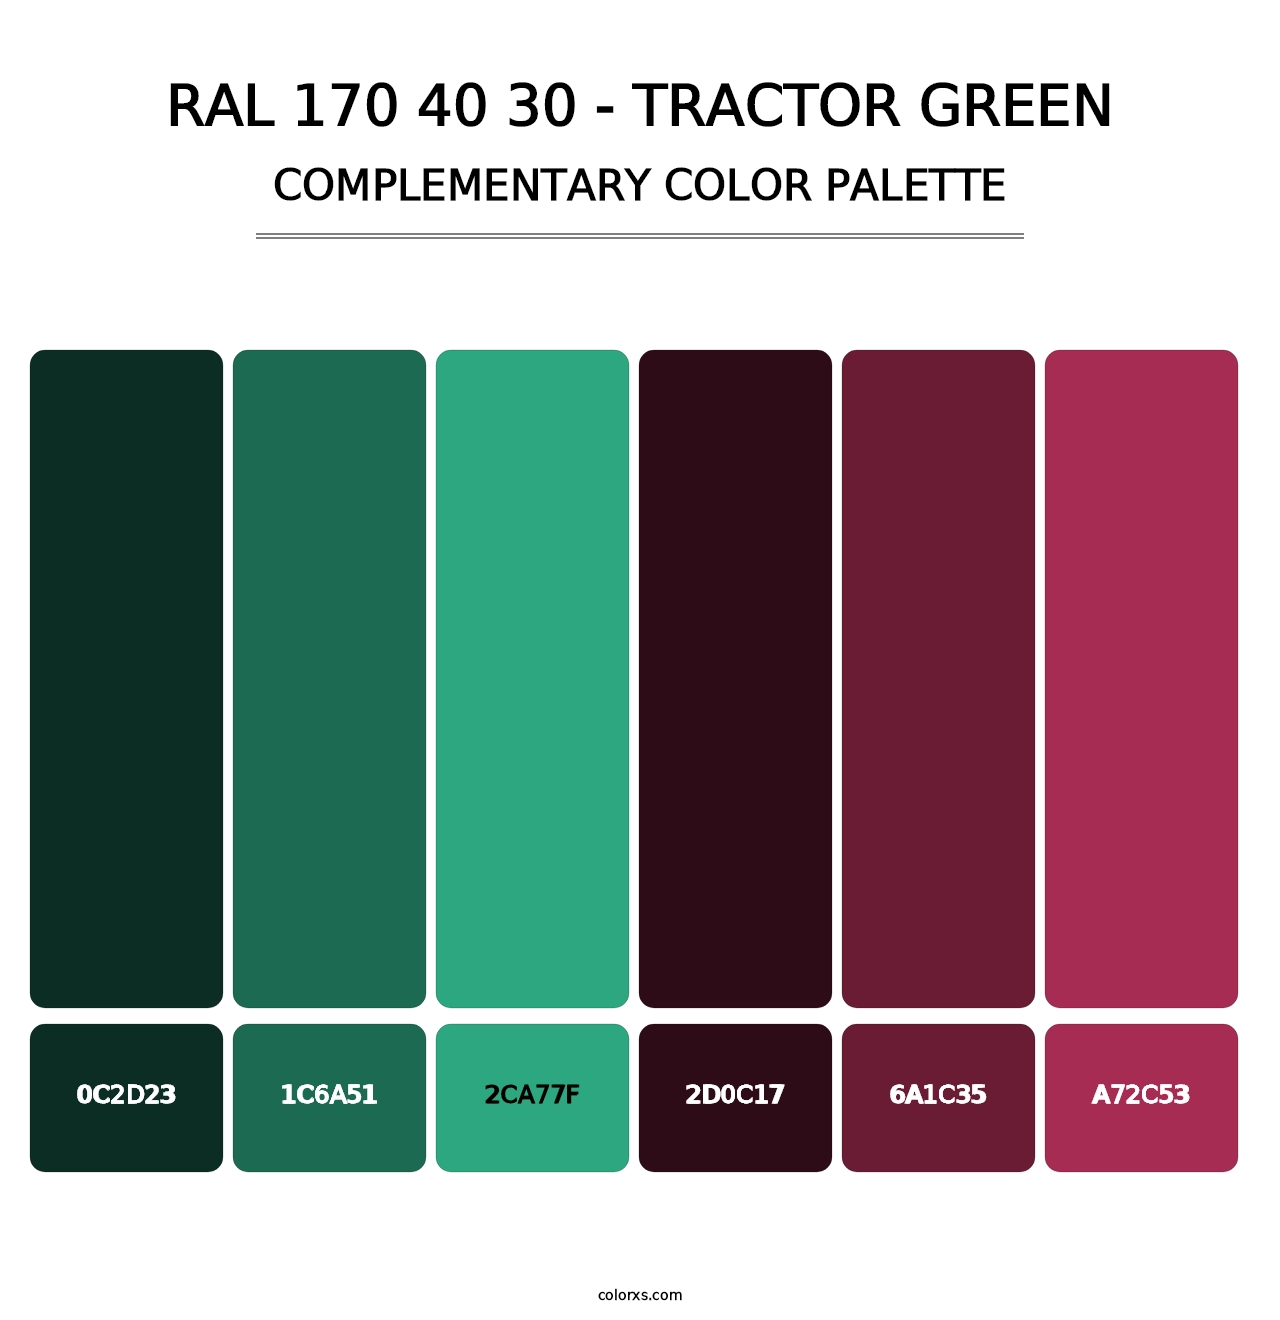 RAL 170 40 30 - Tractor Green - Complementary Color Palette